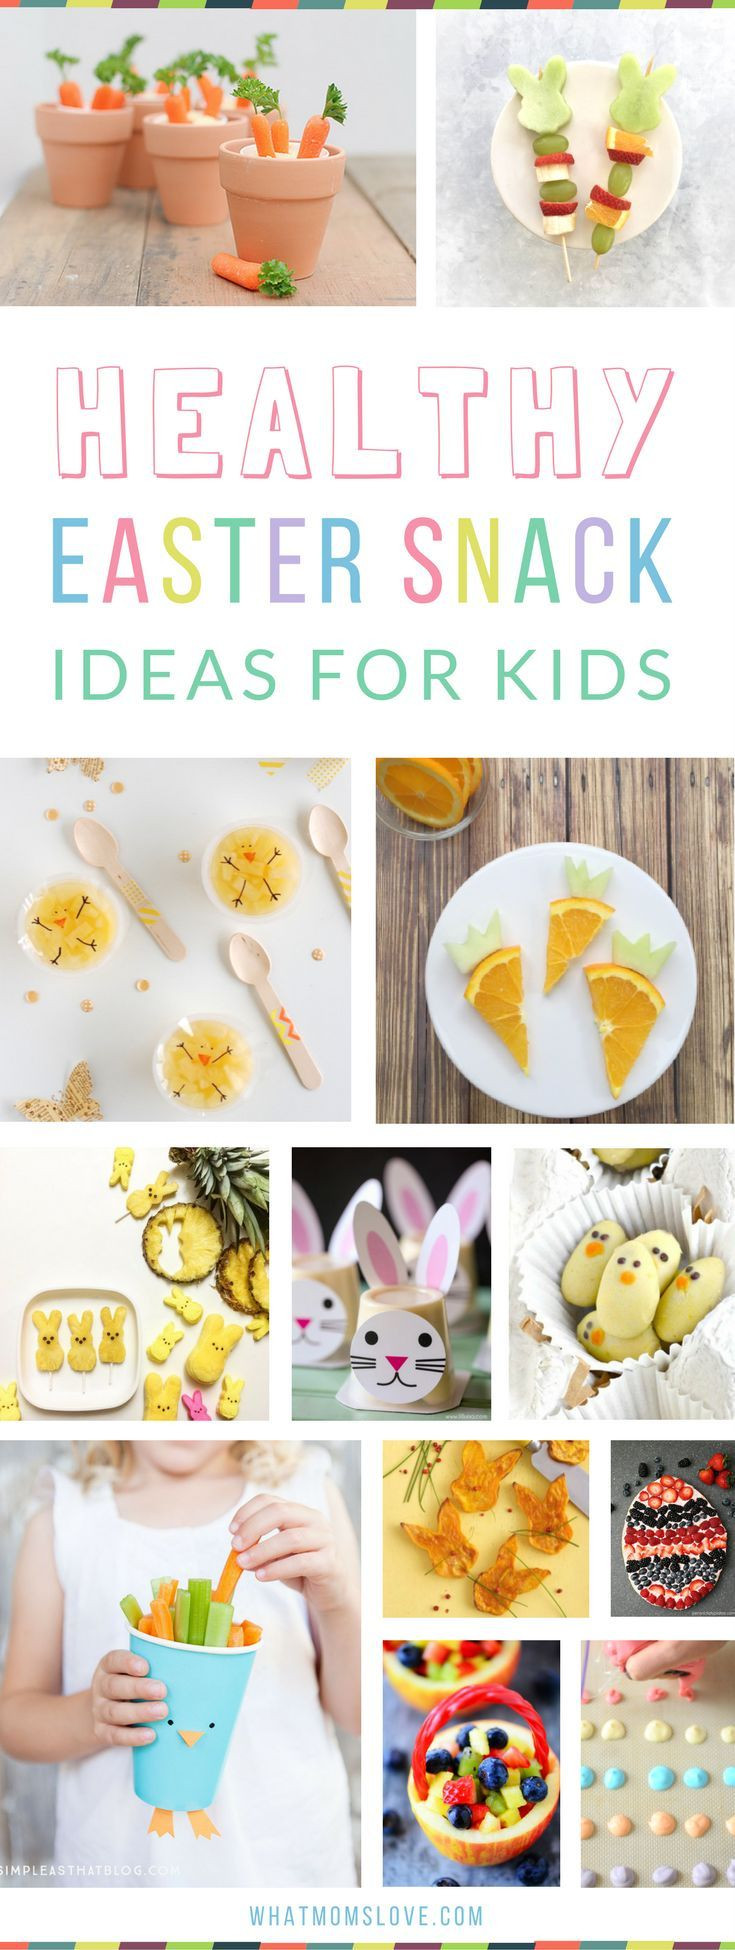 Easter Party Food Ideas For School
 425 best images about EASTER on Pinterest